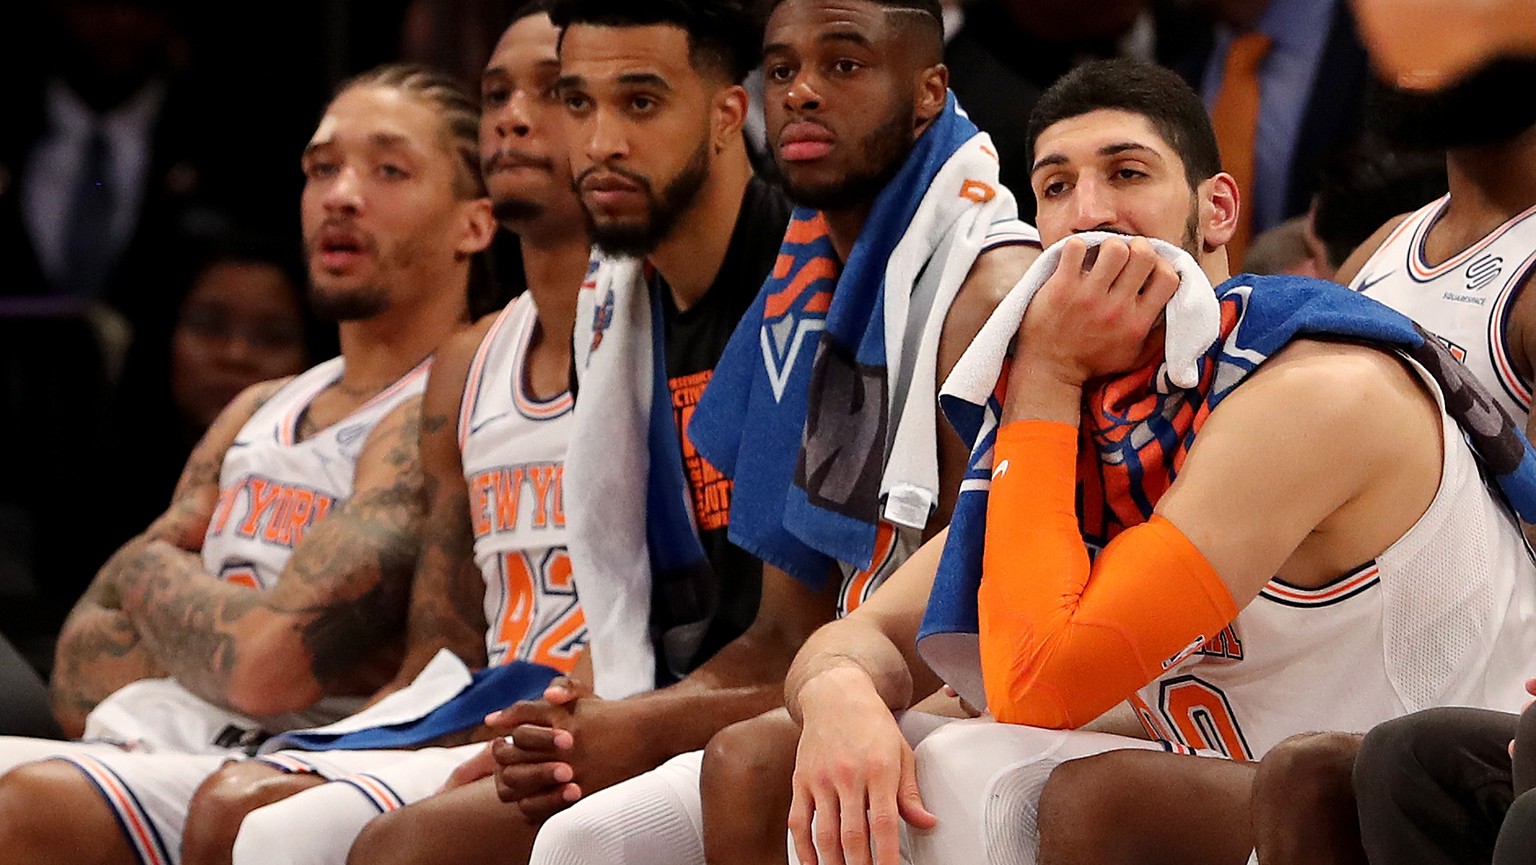 NEW YORK, NY - FEBRUARY 26: The New York Knicks bench reacts to the loss to the Golden State Warriors at Madison Square Garden on February 26, 2018 in New York City. NOTE TO USER: User expressly ackno ...